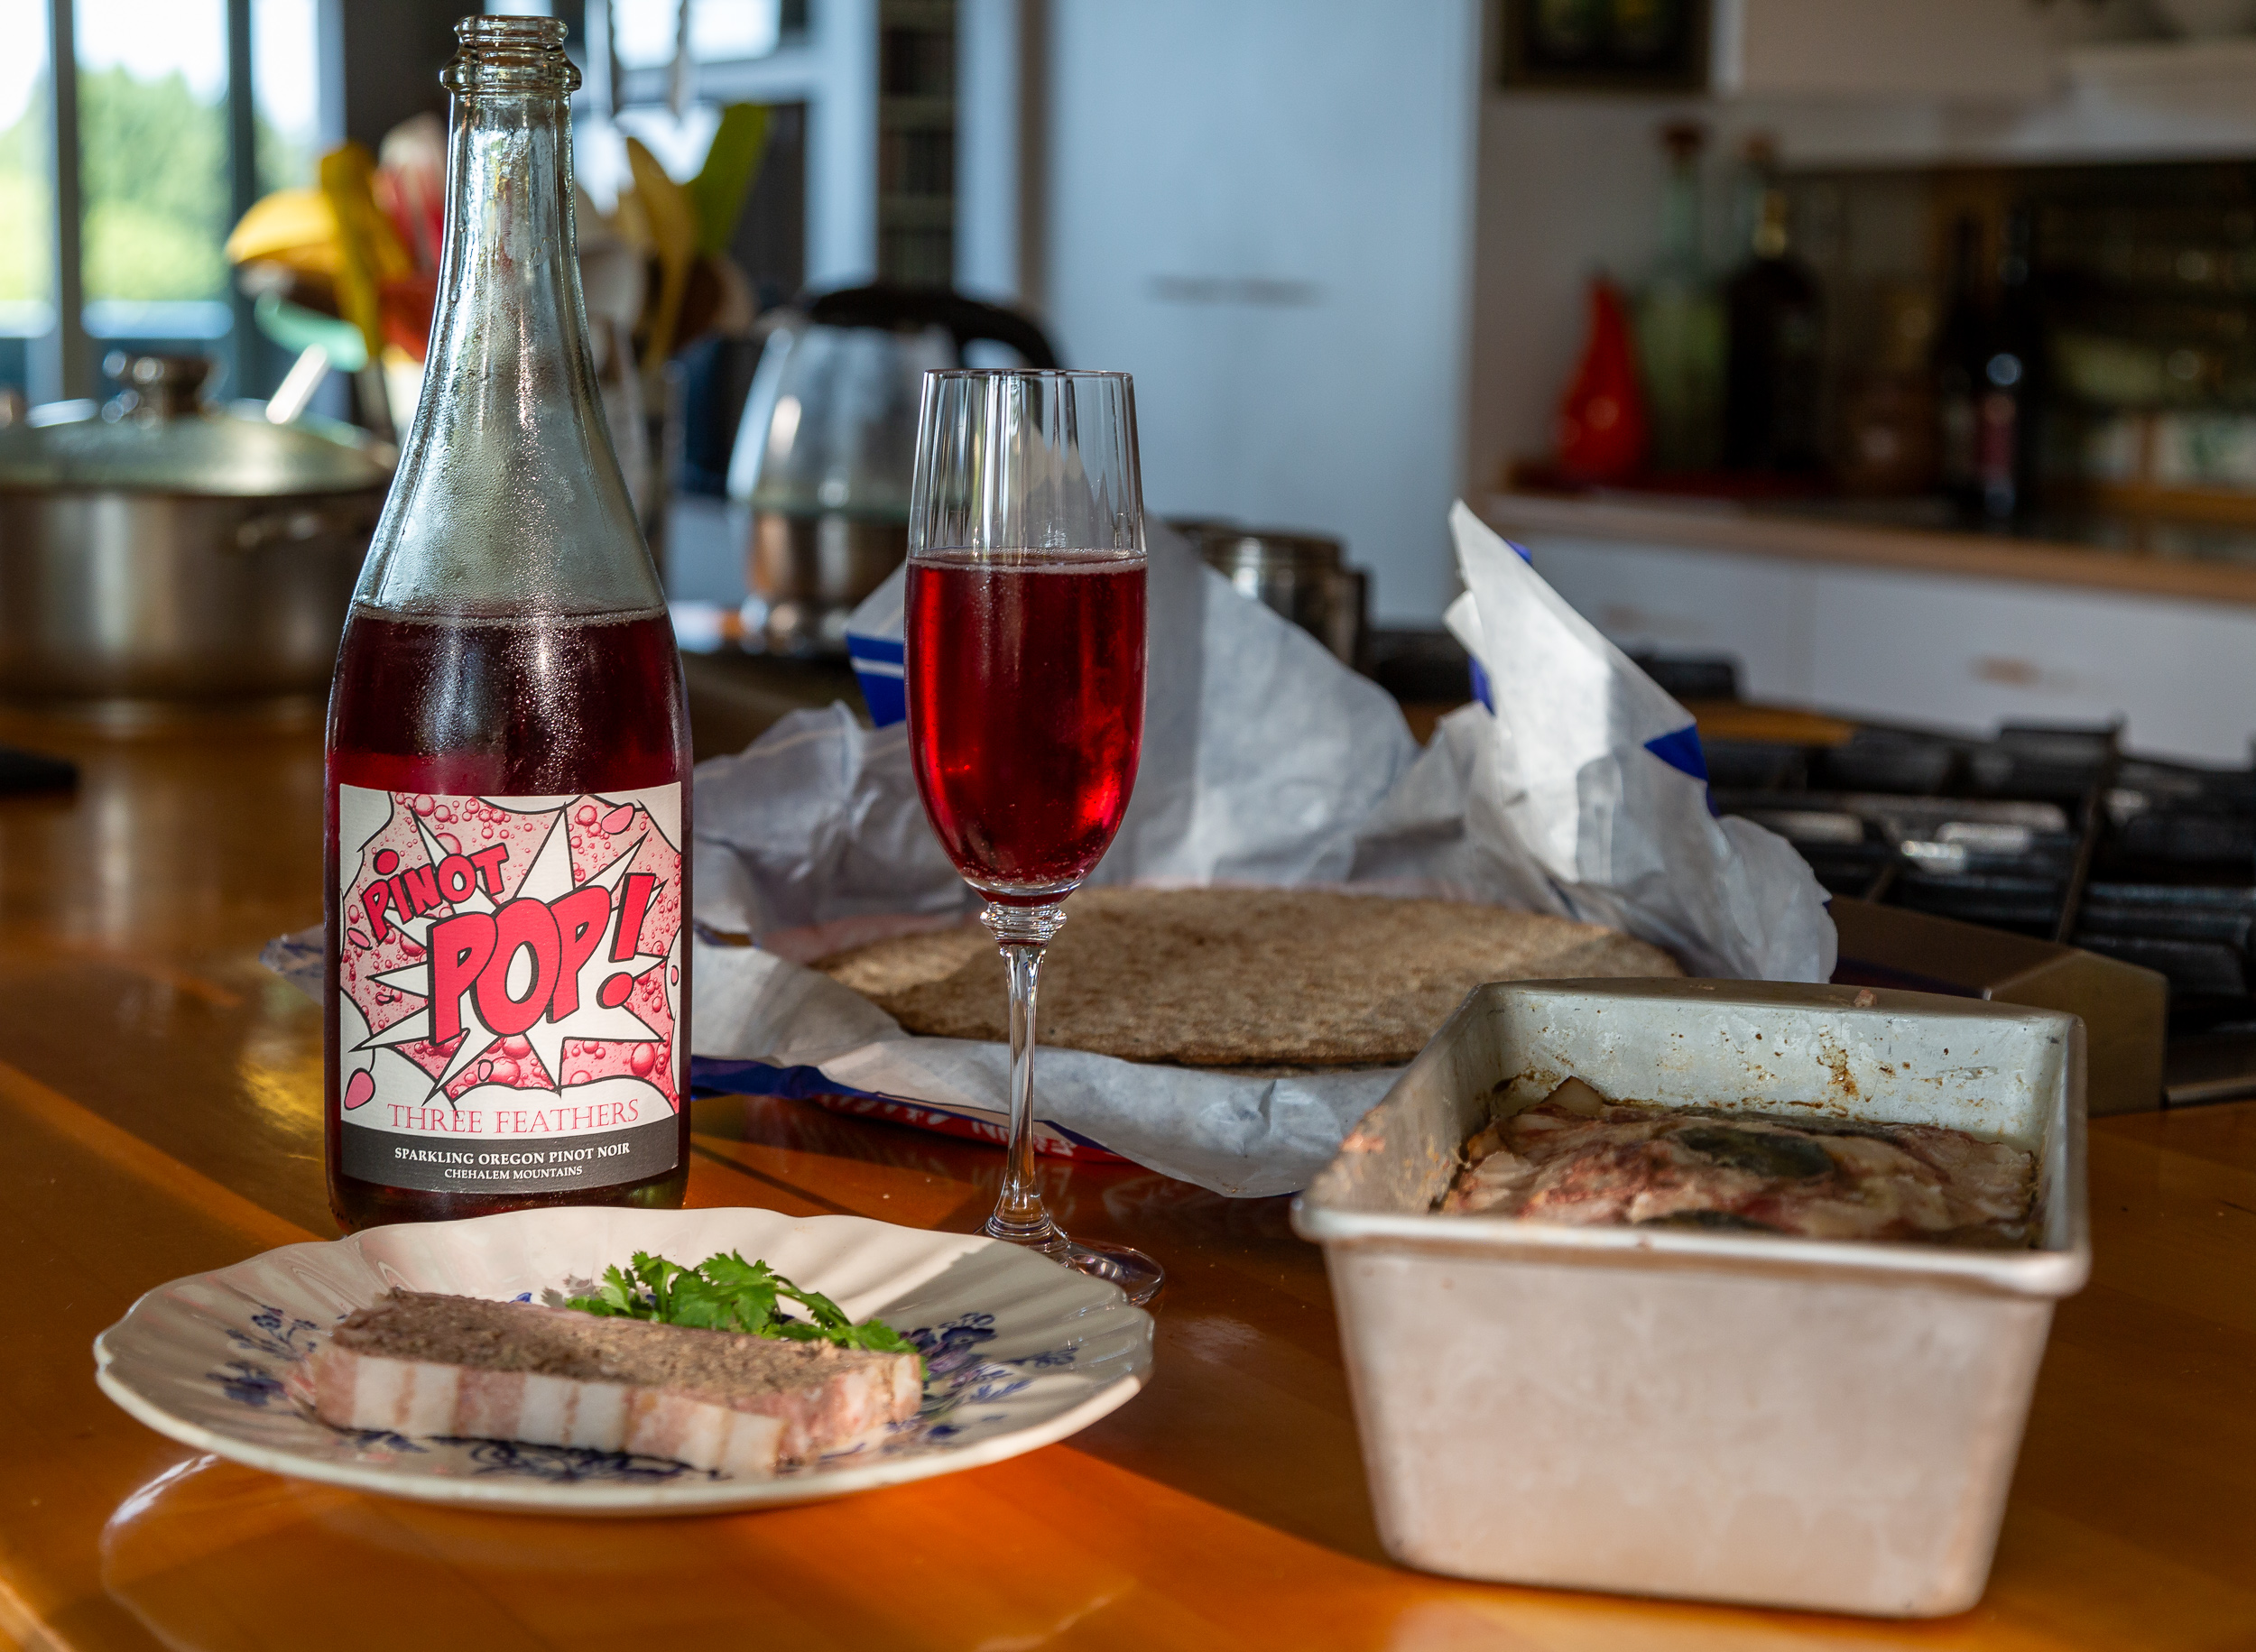 Three Feathers Pinot POP pairs perfectly as a starter with Homemade Rabbit Pate